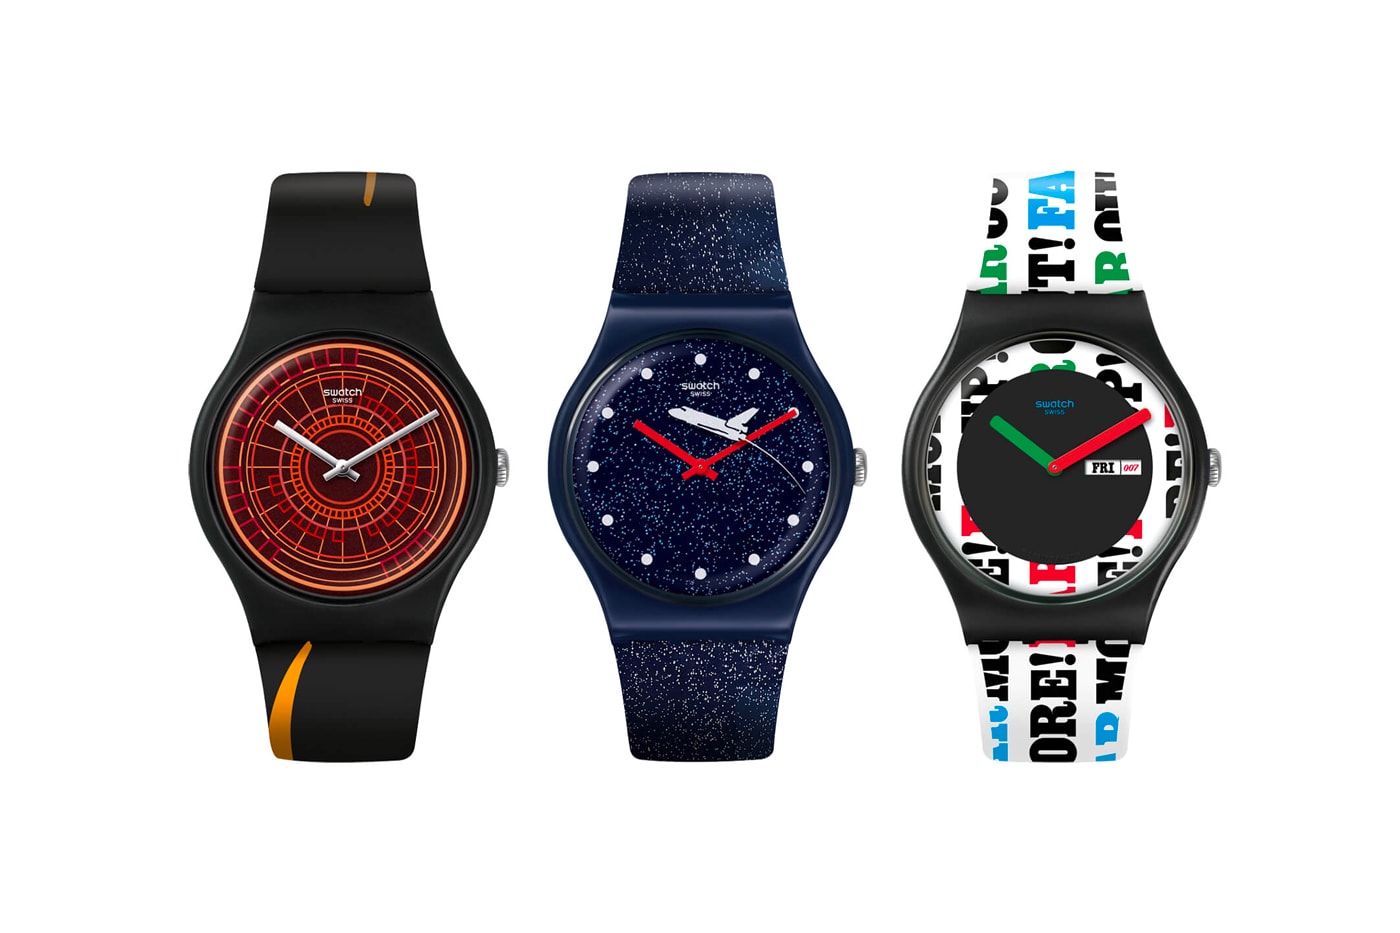 swatch がJames Bond にちなんだ"X 007" カプセルコレクションを発表 swatch x 007 james bond no time to die watches accessories gent Dr No On Her Majesty’s Secret Service Moonraker Licence to Kill The World is Not Enough Casino Royale